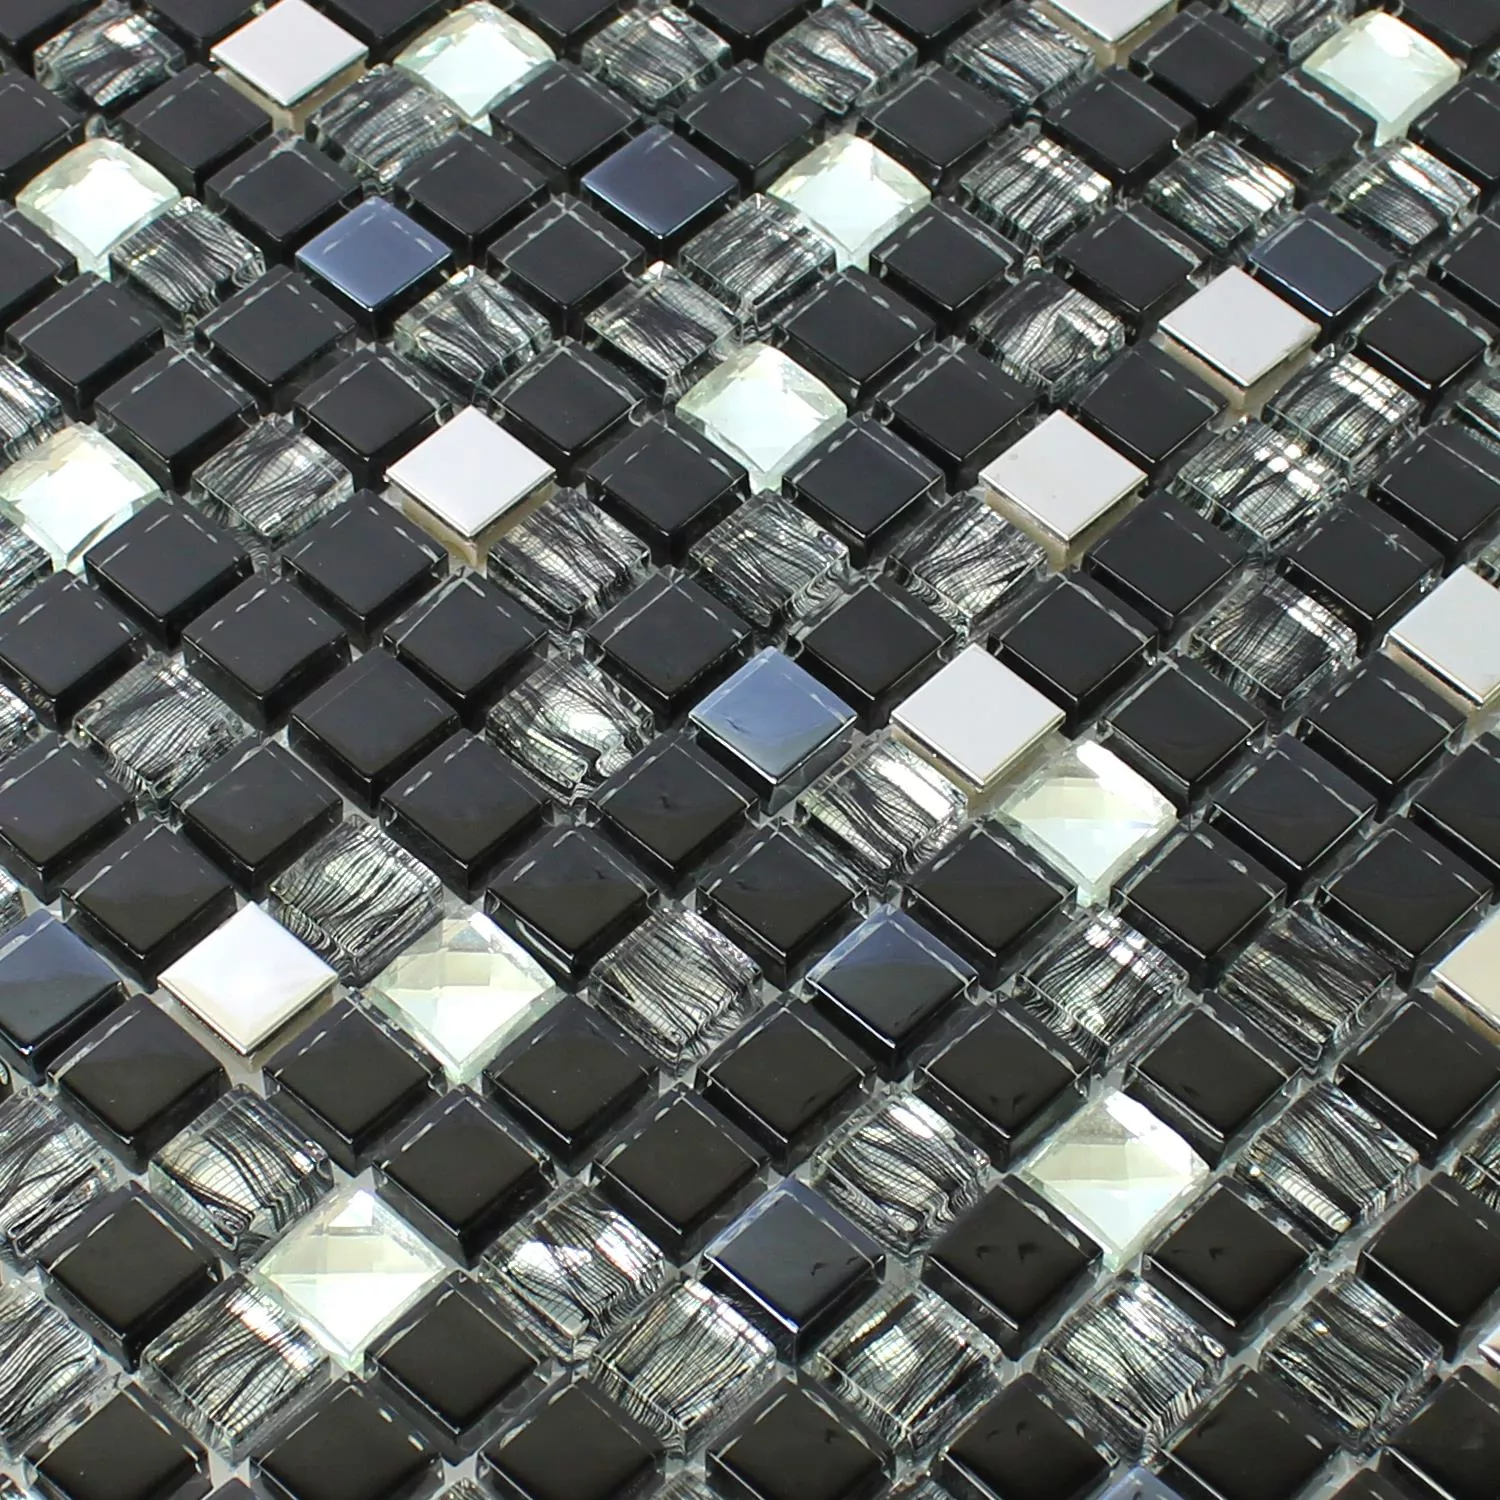 Sample Mosaic Tiles Glass Stainless Steel Black Mix 